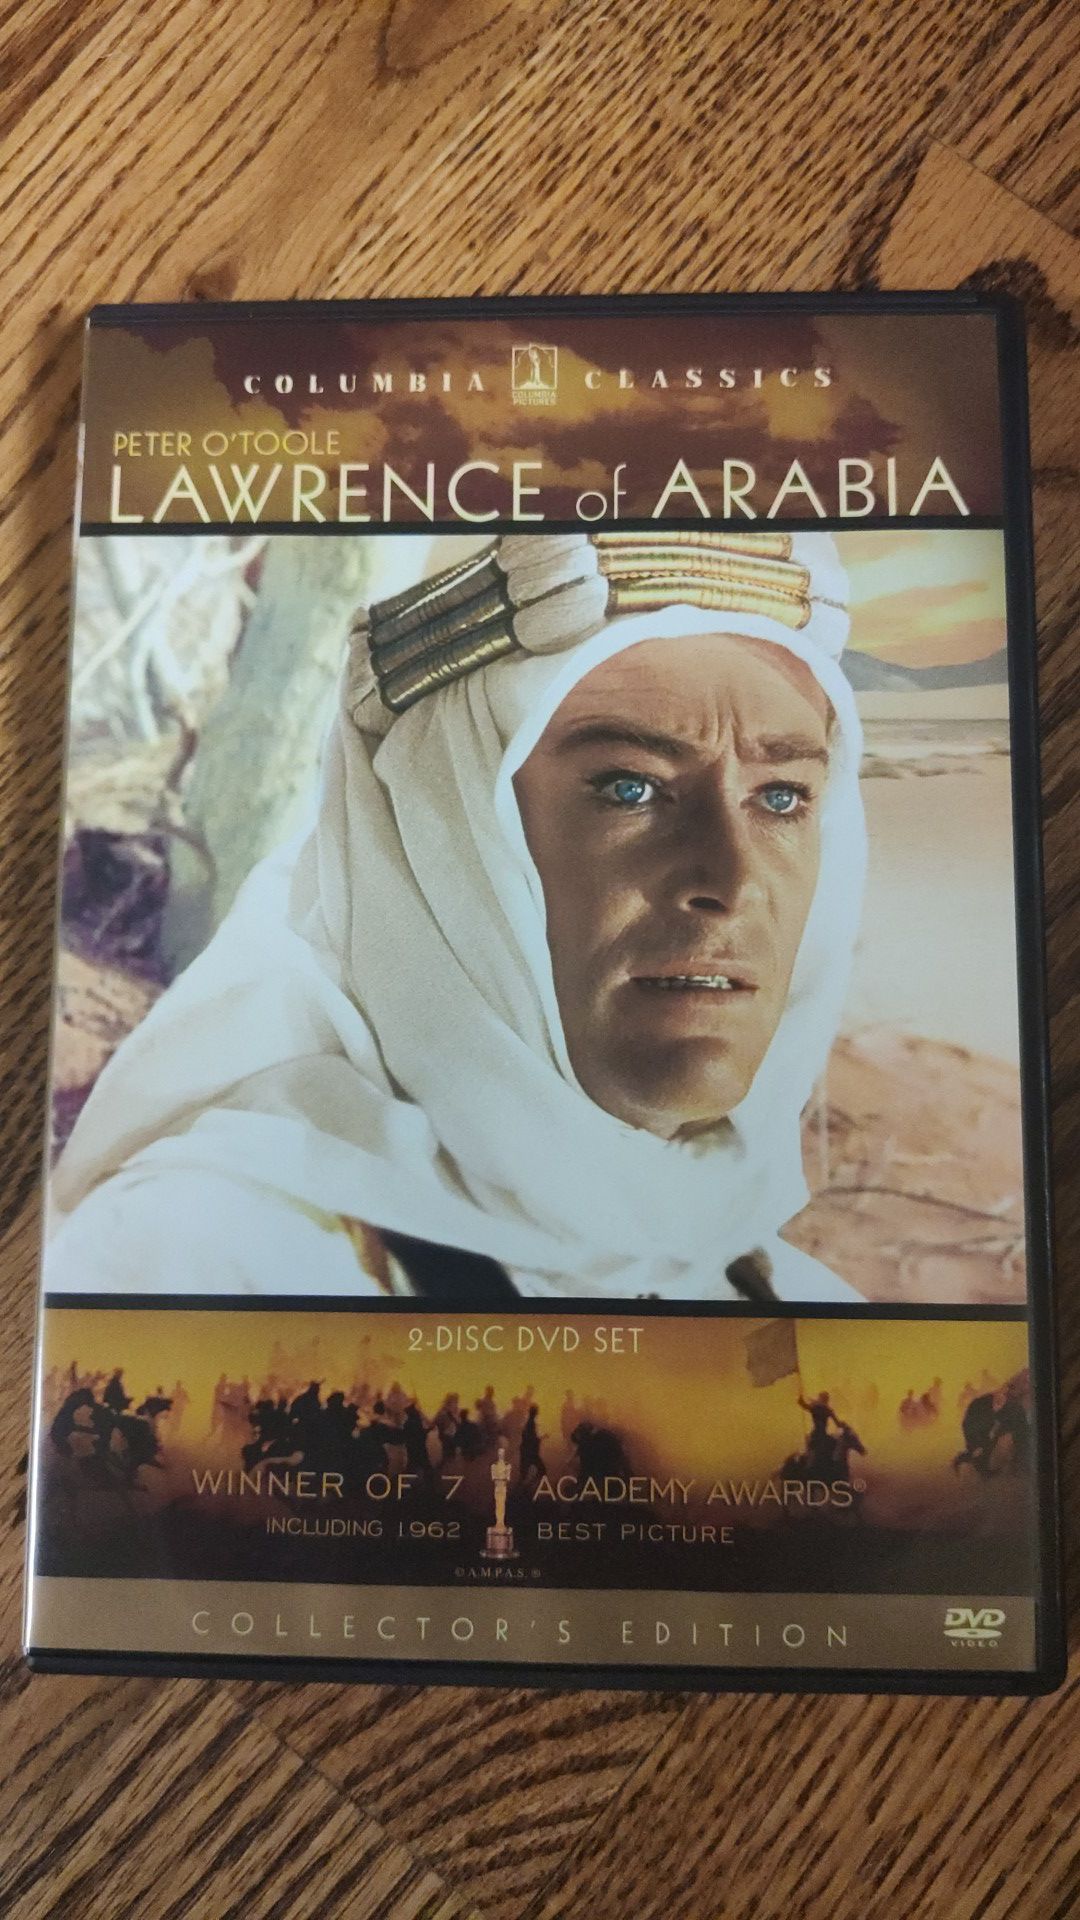 Lawrence of Arabia on CD